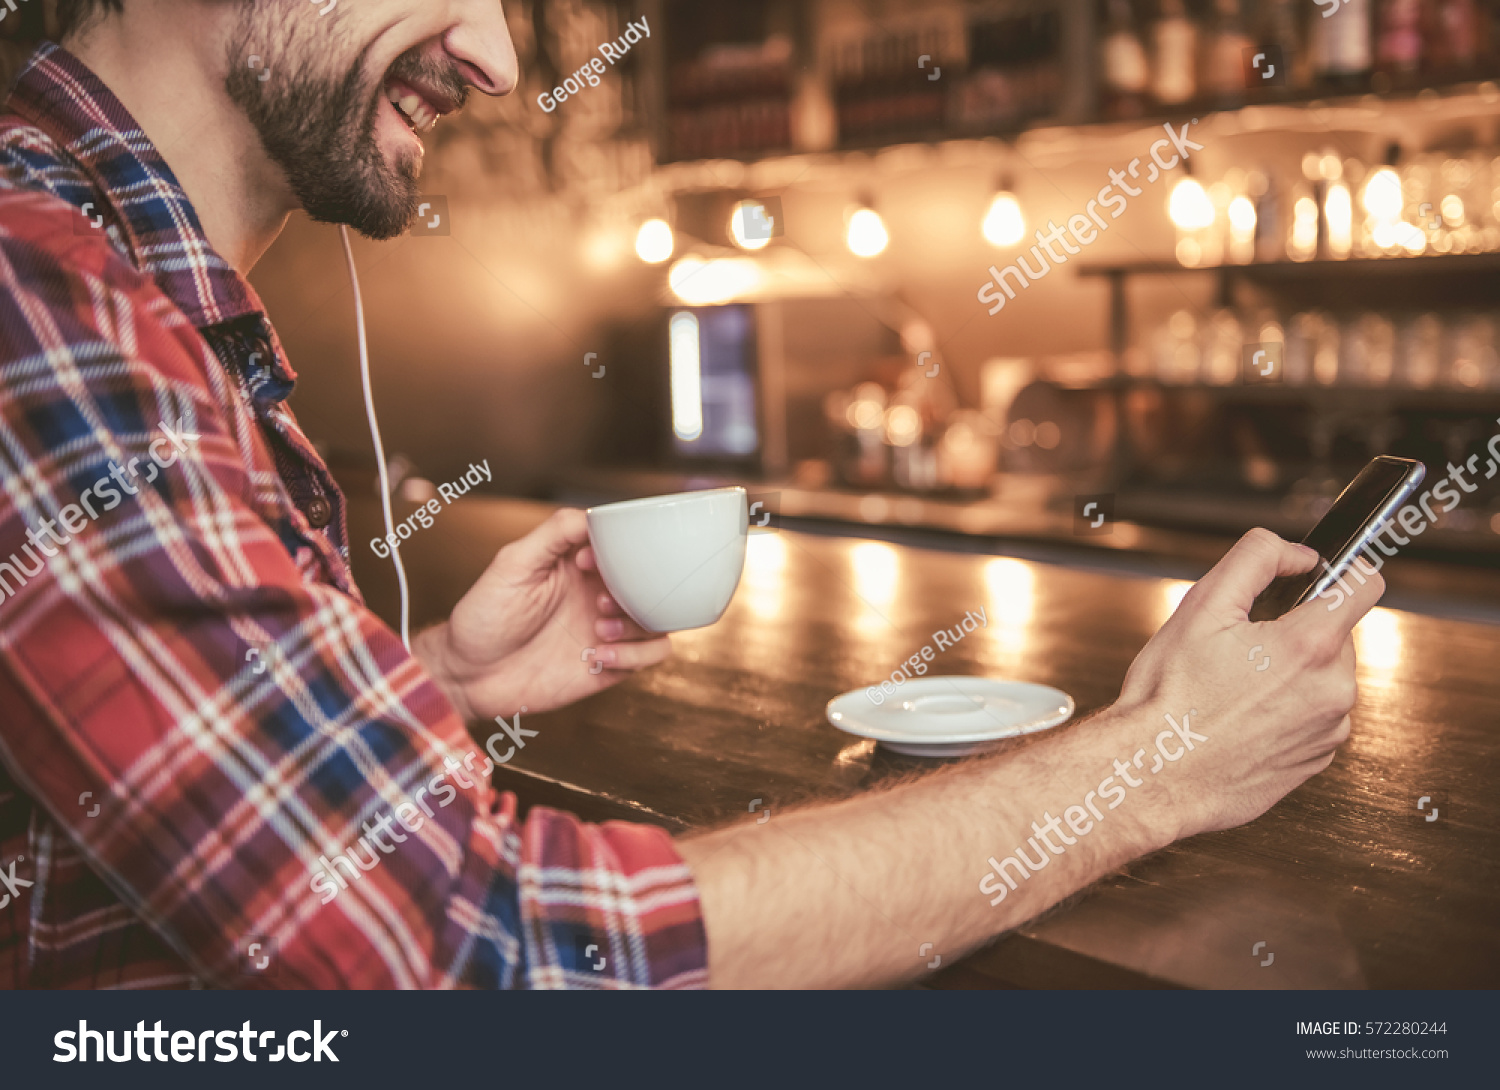 Cropped image of man in headphones listening to music using a smartphone, drinking coffee and smiling while resting in cafe #572280244